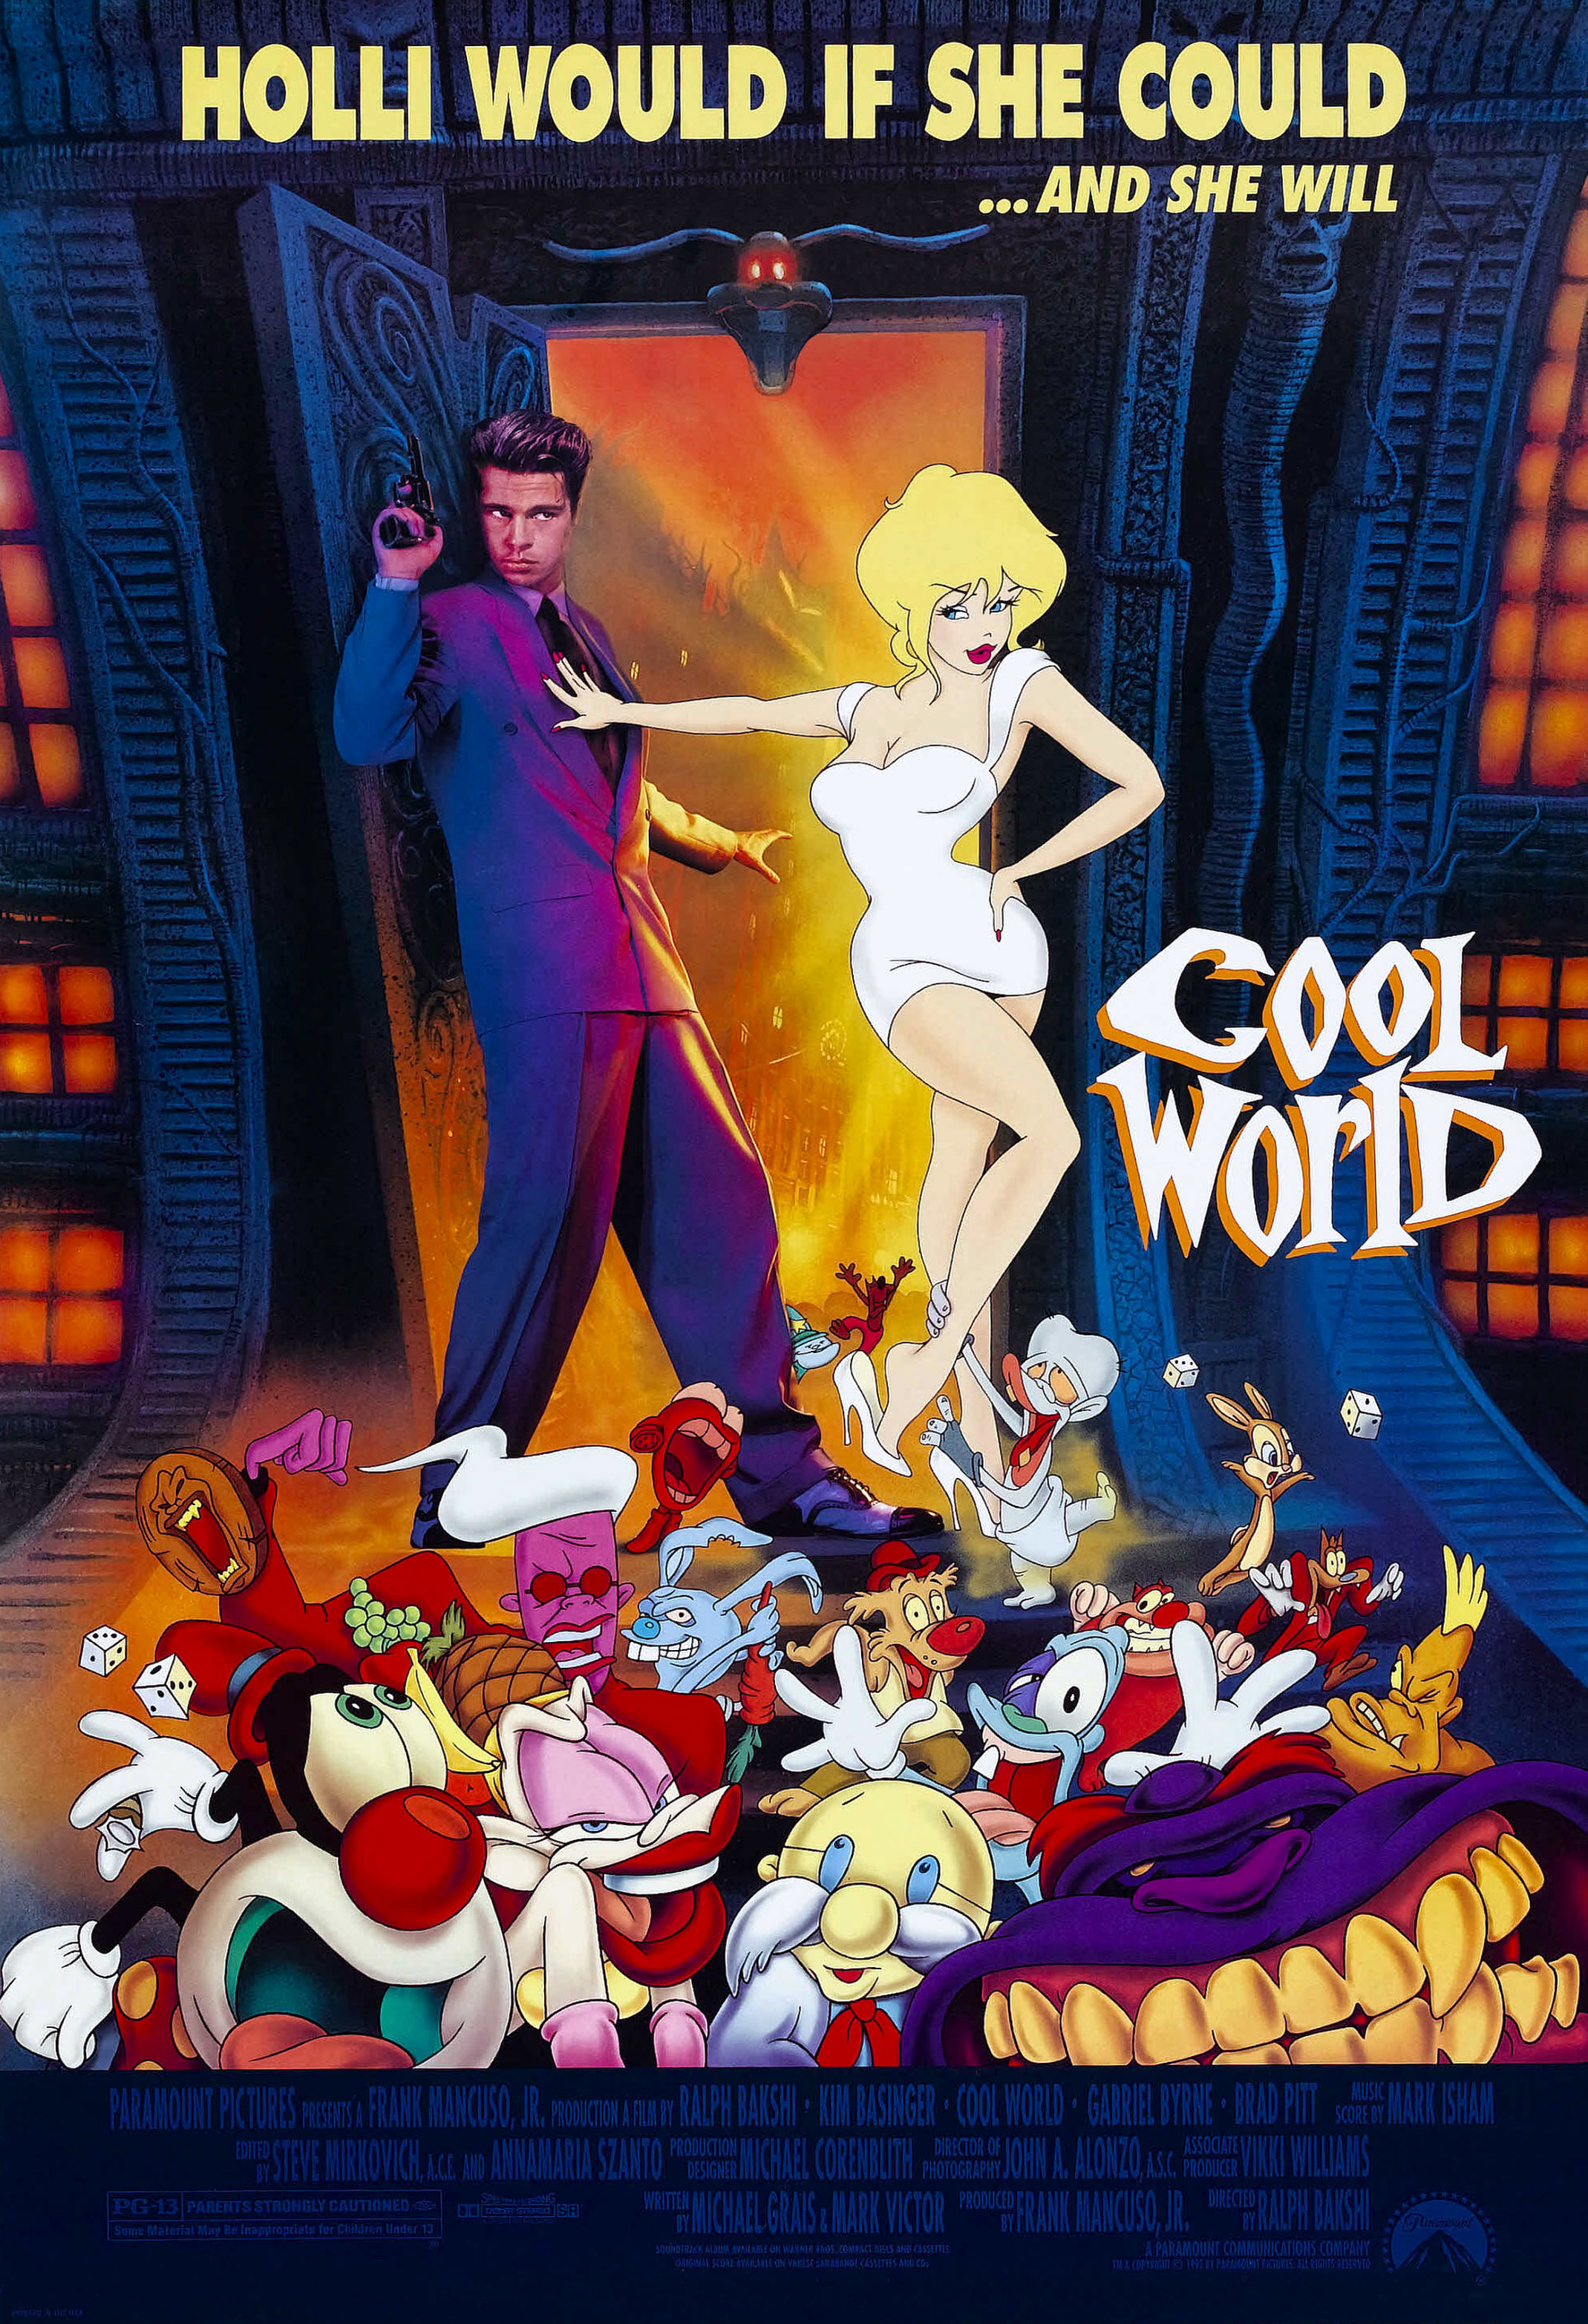 Cool World movie poster featuring animated characters, Gabriel Byrne, and Holli Would, with a tagline &quot;Holli Would if she could... and she will.&quot;